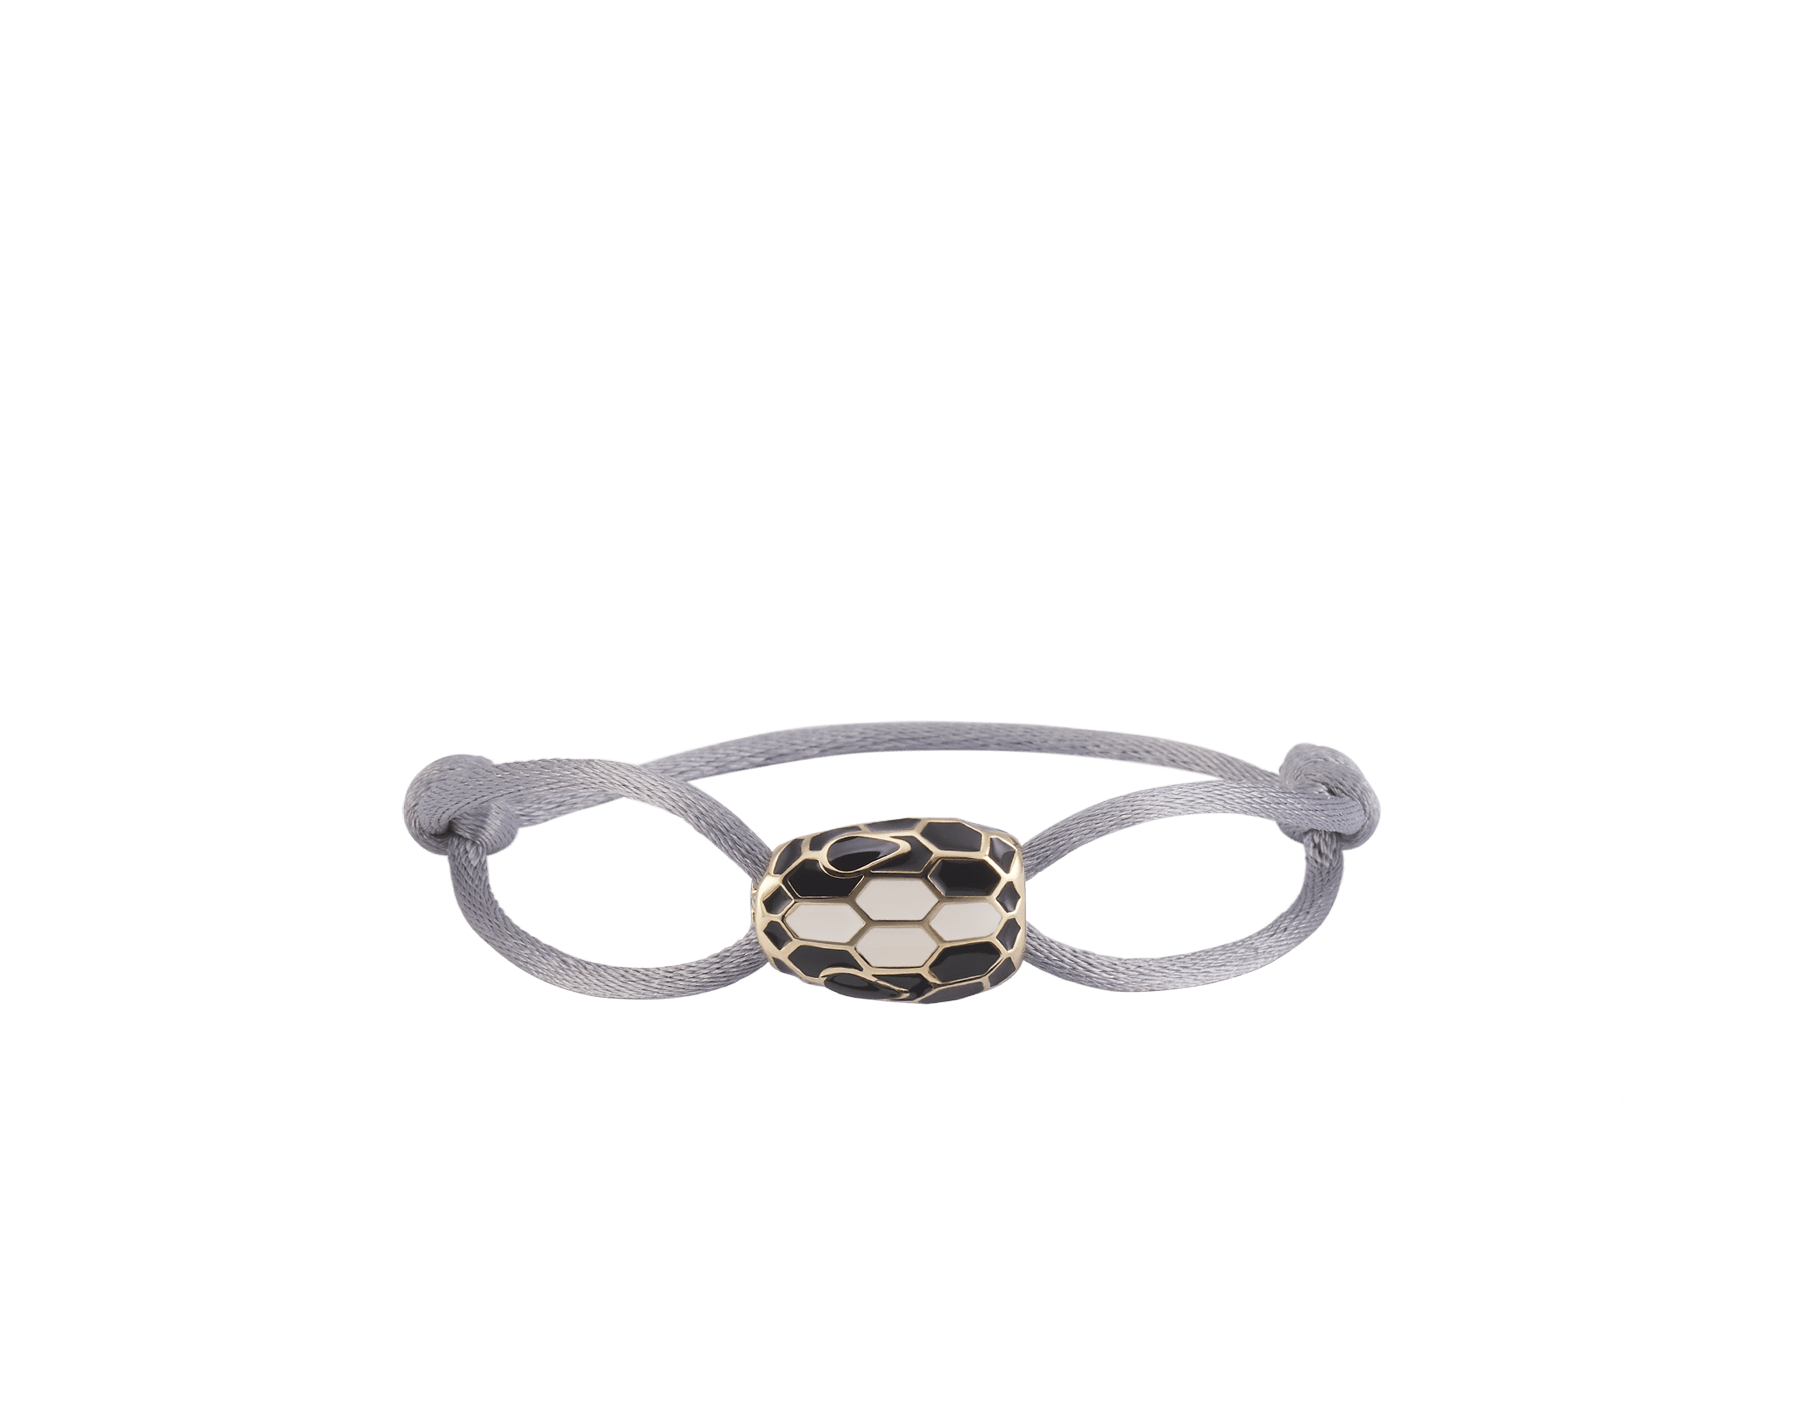 Serpenti Forever bracelet in foggy opal grey fabric. Captivating light gold-plated brass snakehead embellishment with black and white agate enamel scales and black enamel eyes. SERP-STRINGf image 1